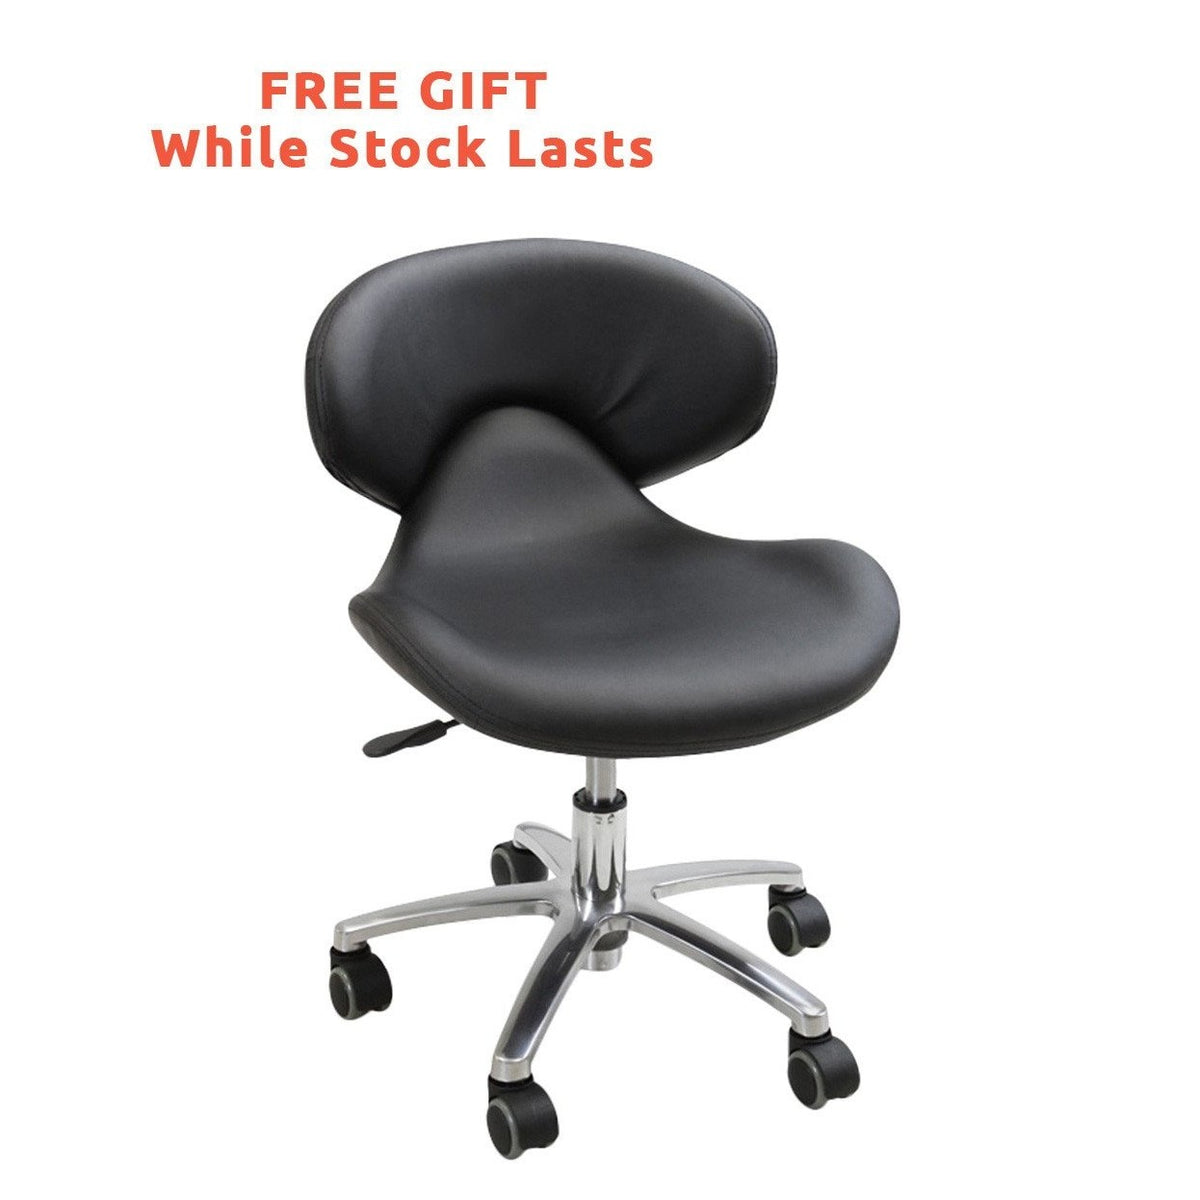 Continuum Continuum Bravo VE Pedicure Spa Chair Pedicure &amp; Spa Chairs - ChairsThatGive